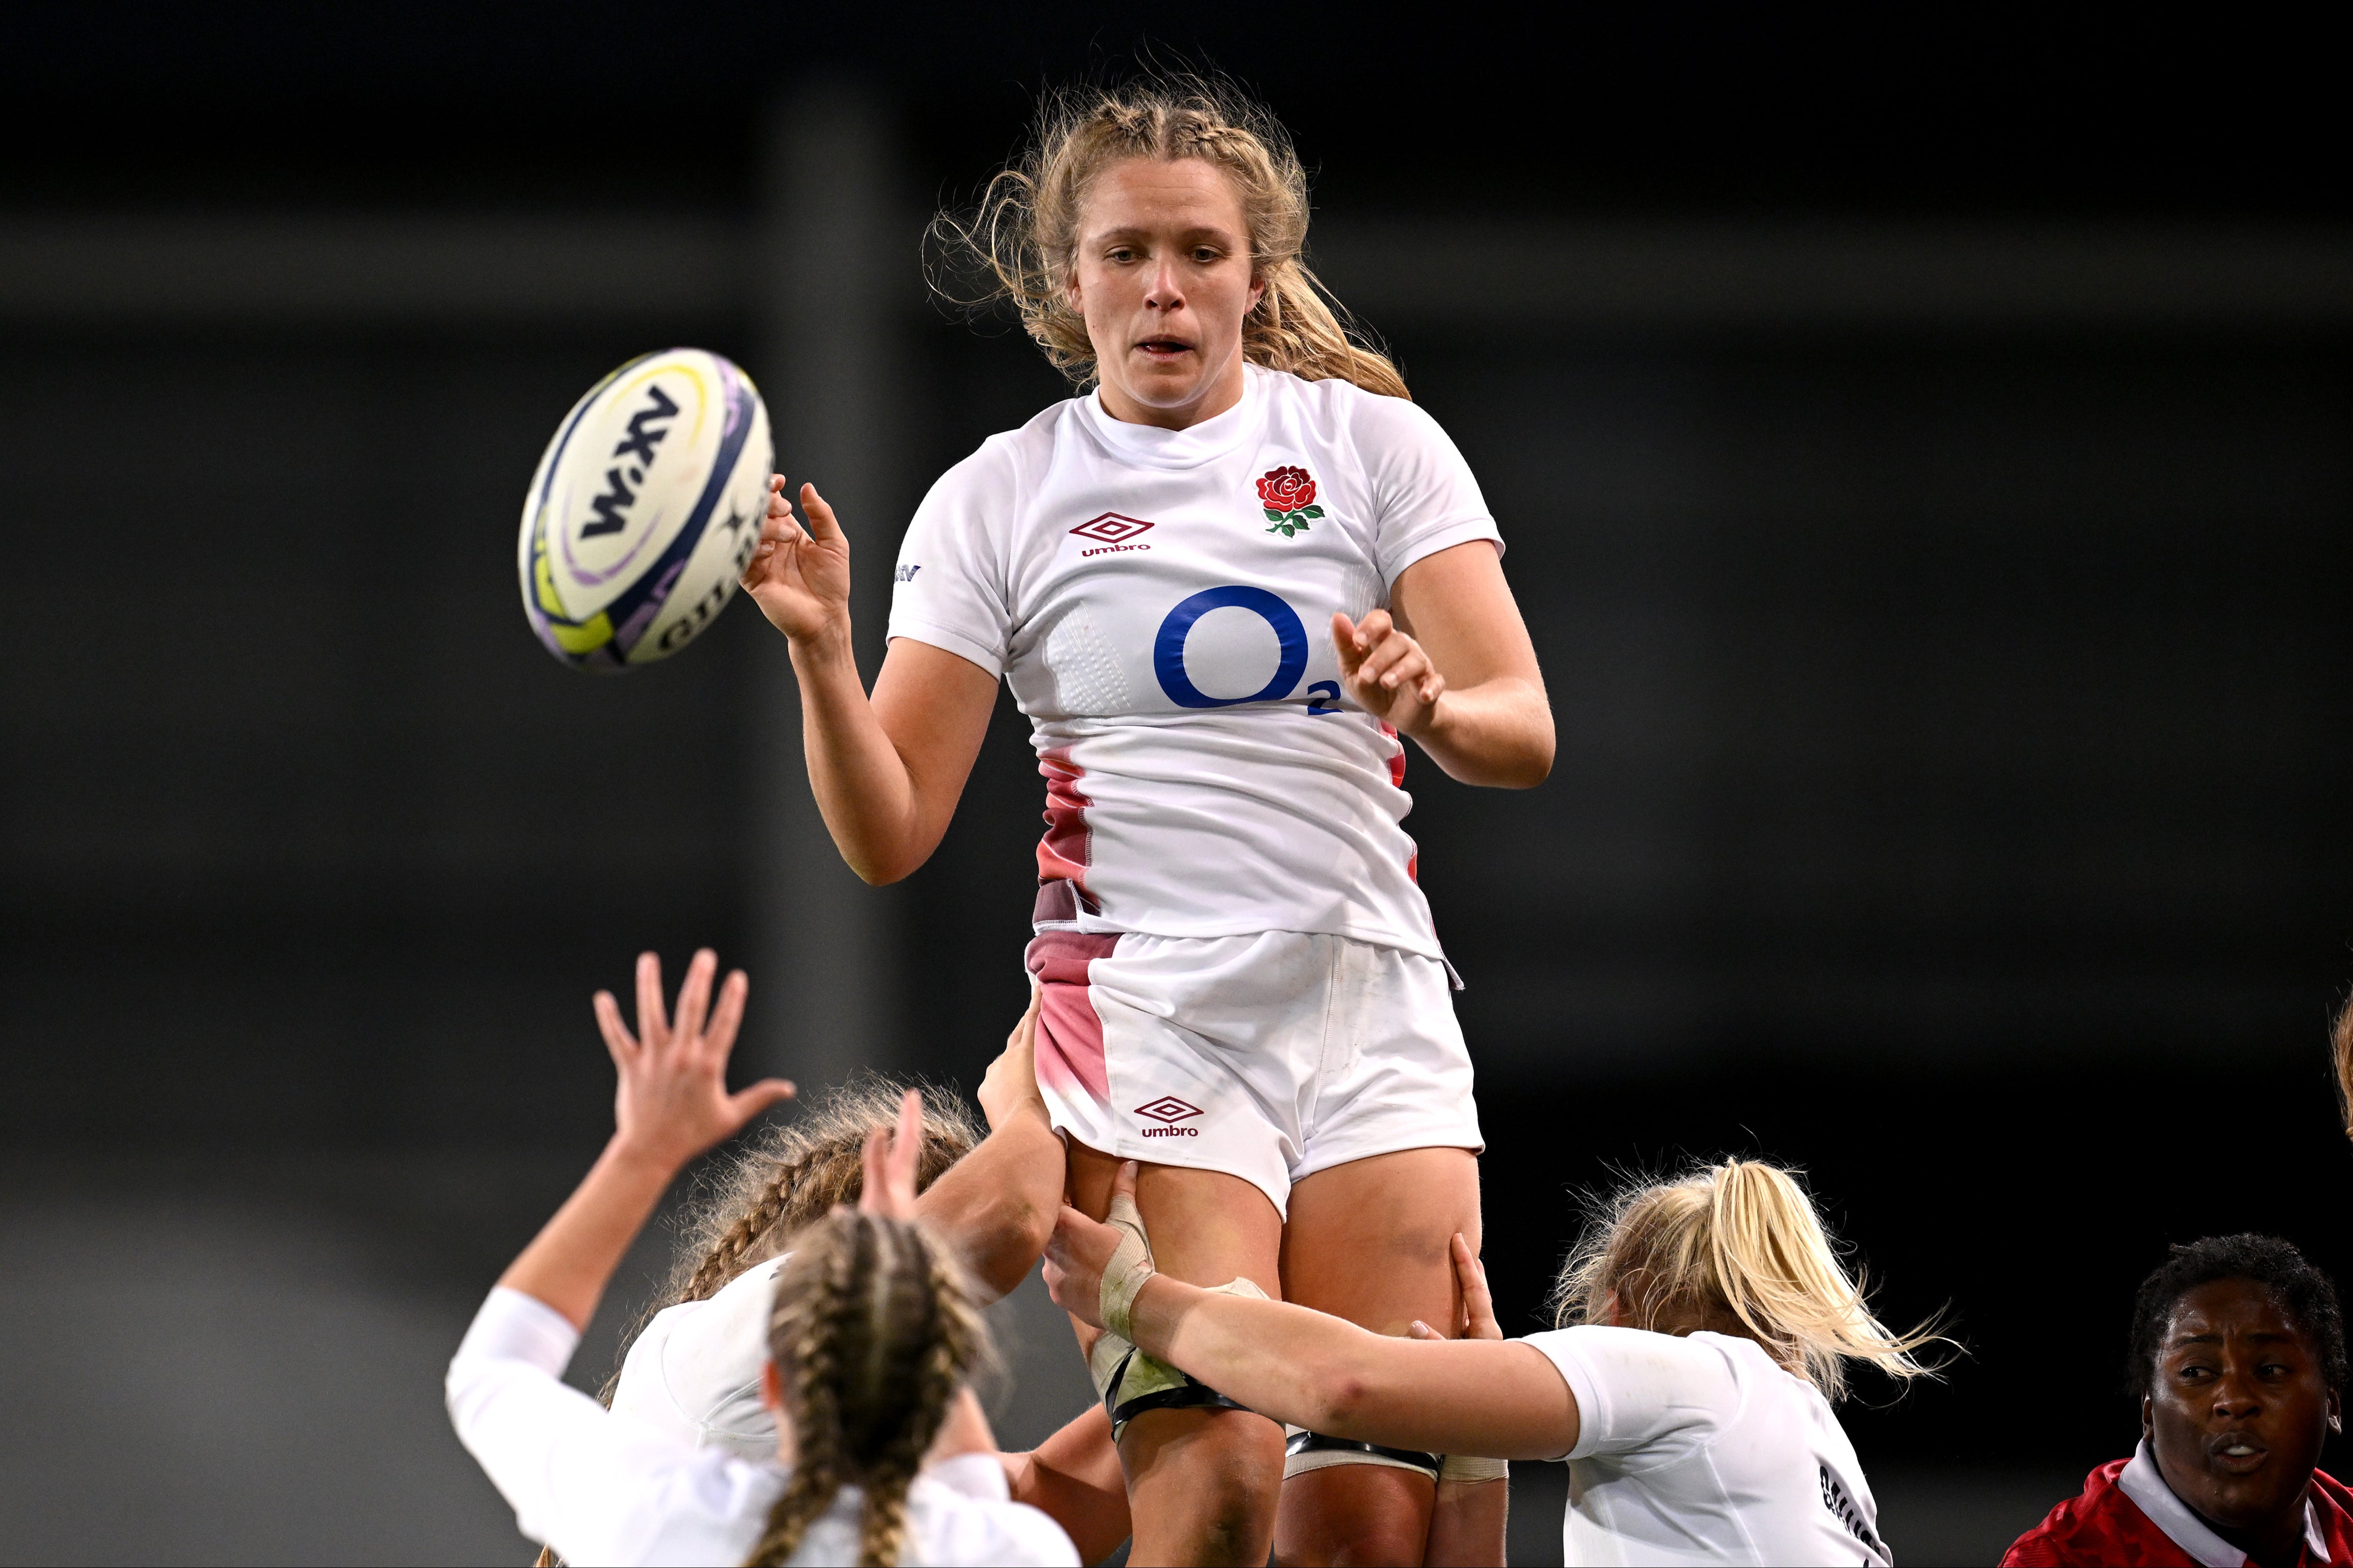 Lock Zoe Aldcroft and England face the Black Ferns in the inaugural WXV competition